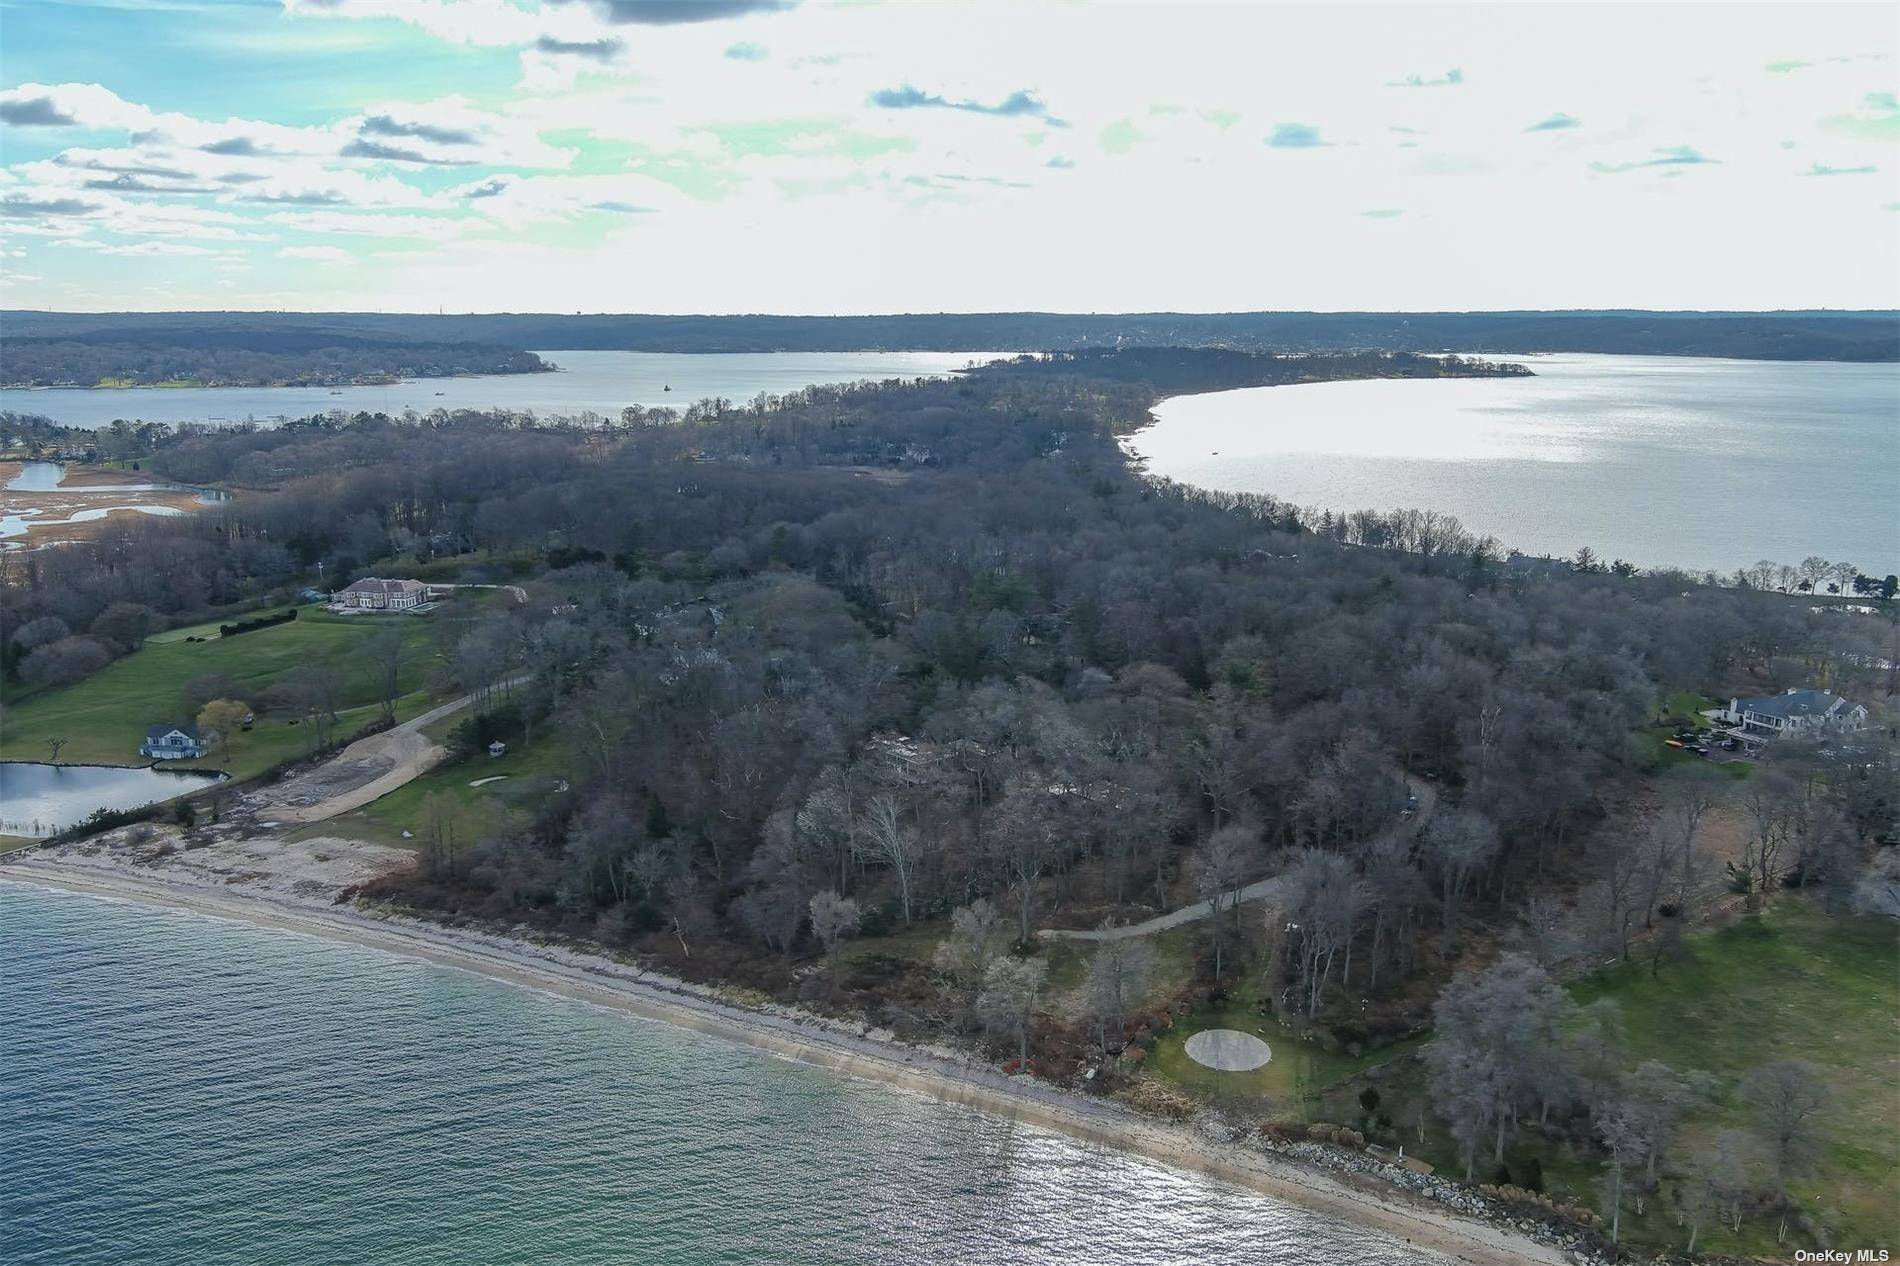 Amazing opportunity to own one of the largest open waterfront parcels on Centre Island with over 564.